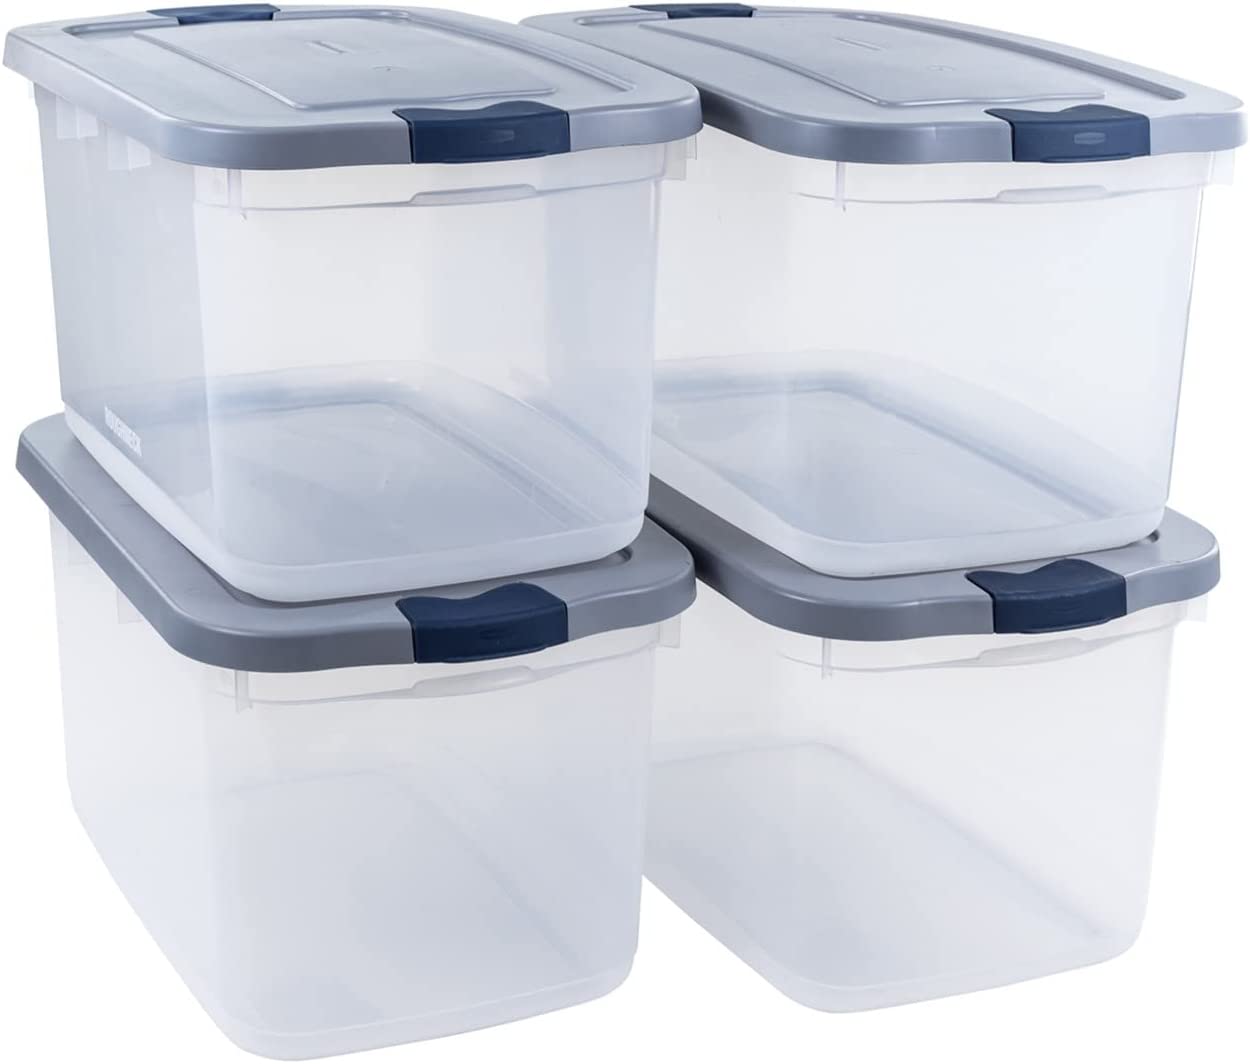 Rubbermaid Roughneck Clear 66 Qt/16.5 Gal Storage Containers, Pack of 4 with Latching Grey Lids, Visible Base, Sturdy and Stackable, Great for Storage and Organization